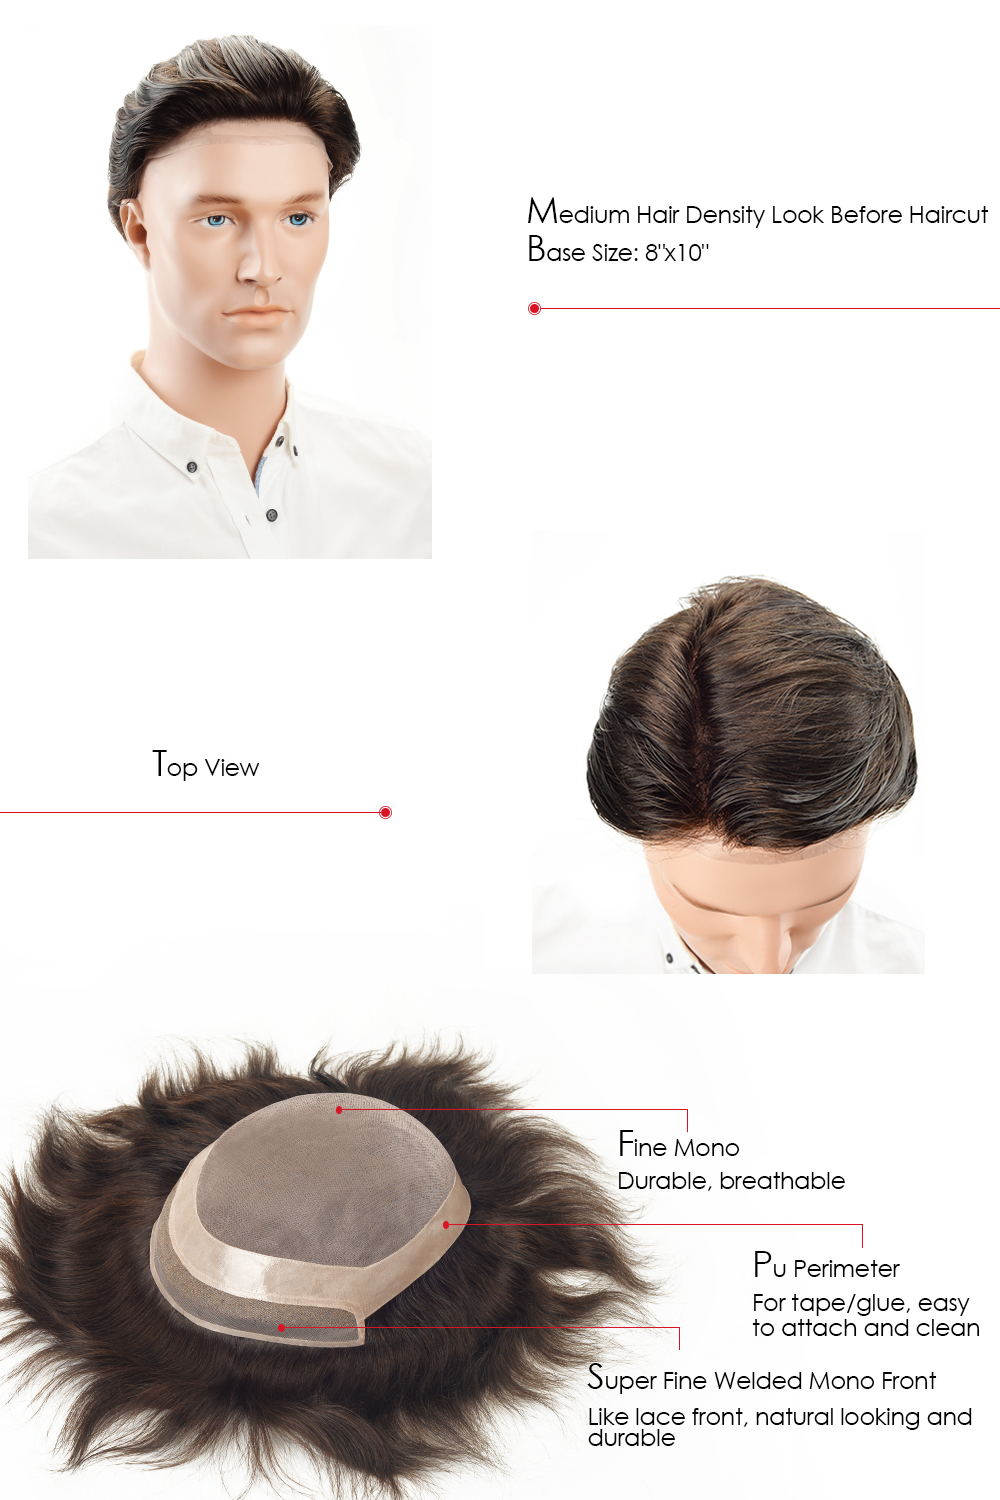 Hair replacement for men